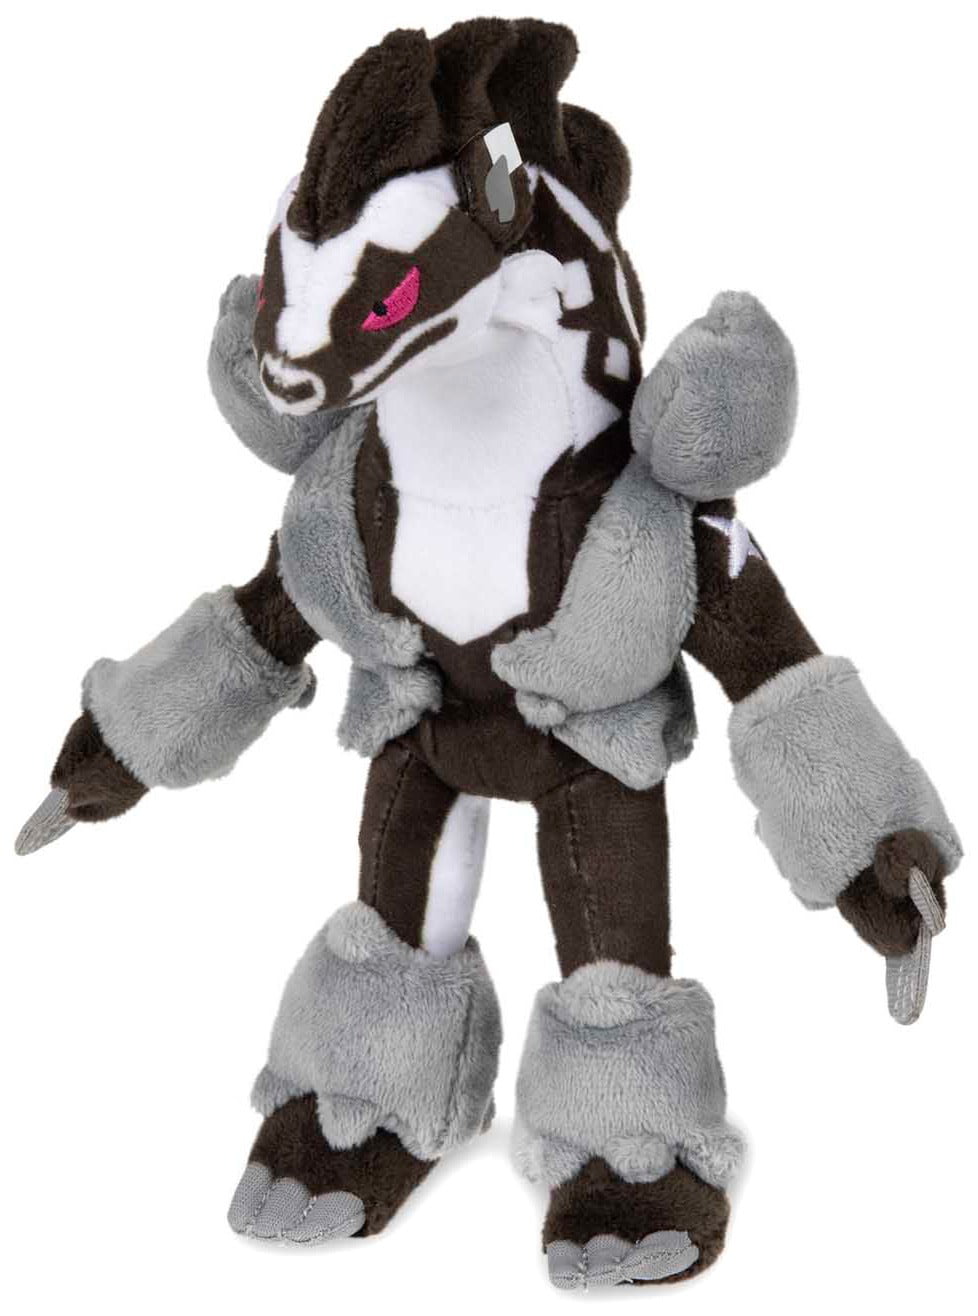 Pokemon Center Original Plush Doll Galarian Obstagoon with Official Paper Tag